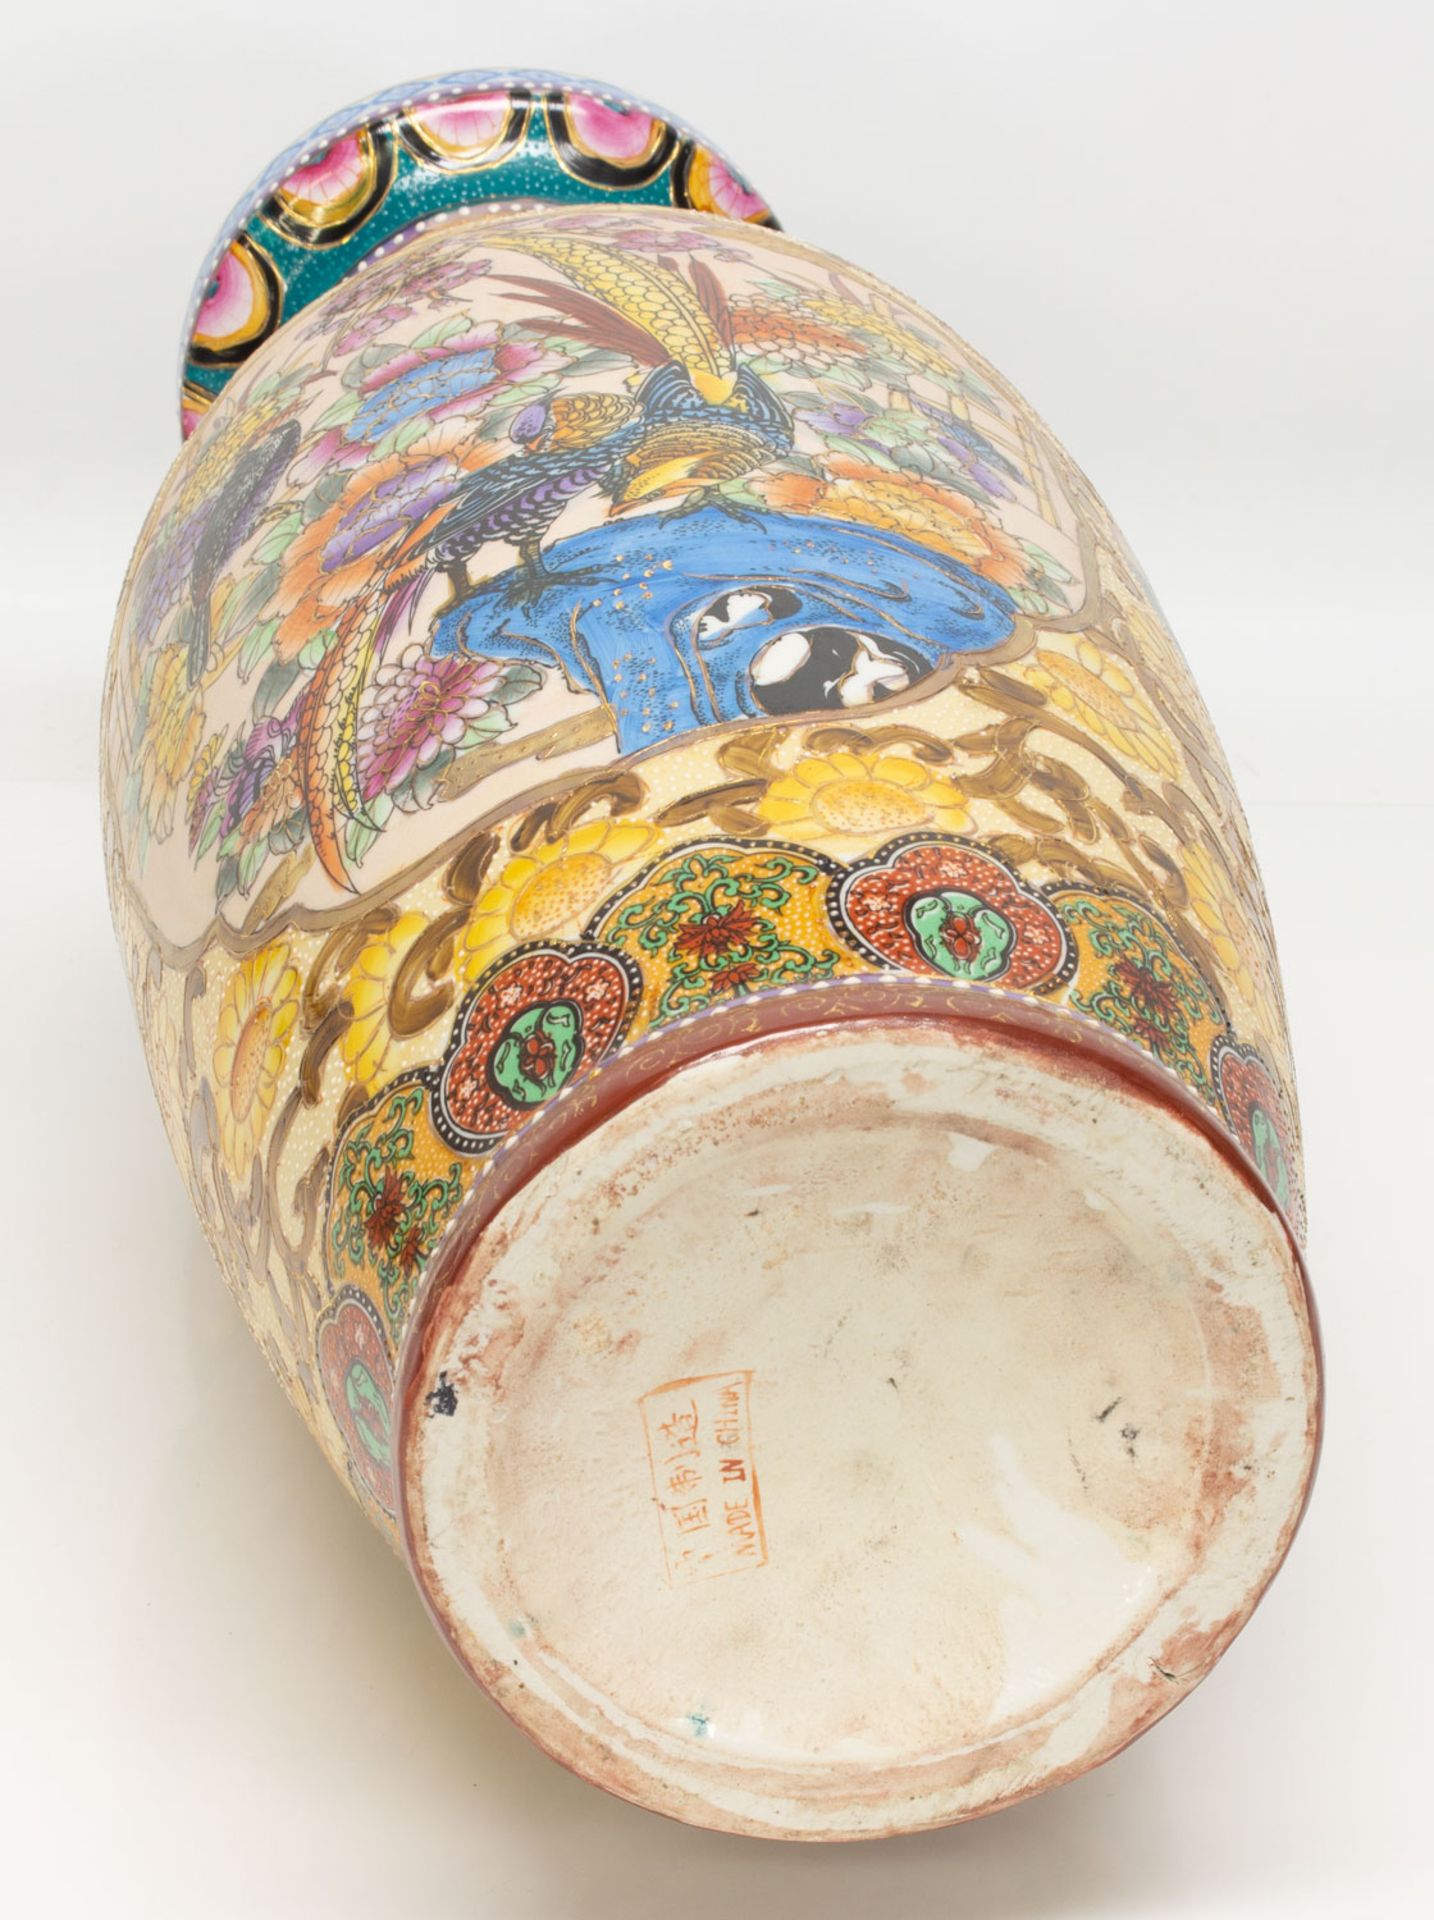 Bodenvase - Image 3 of 3